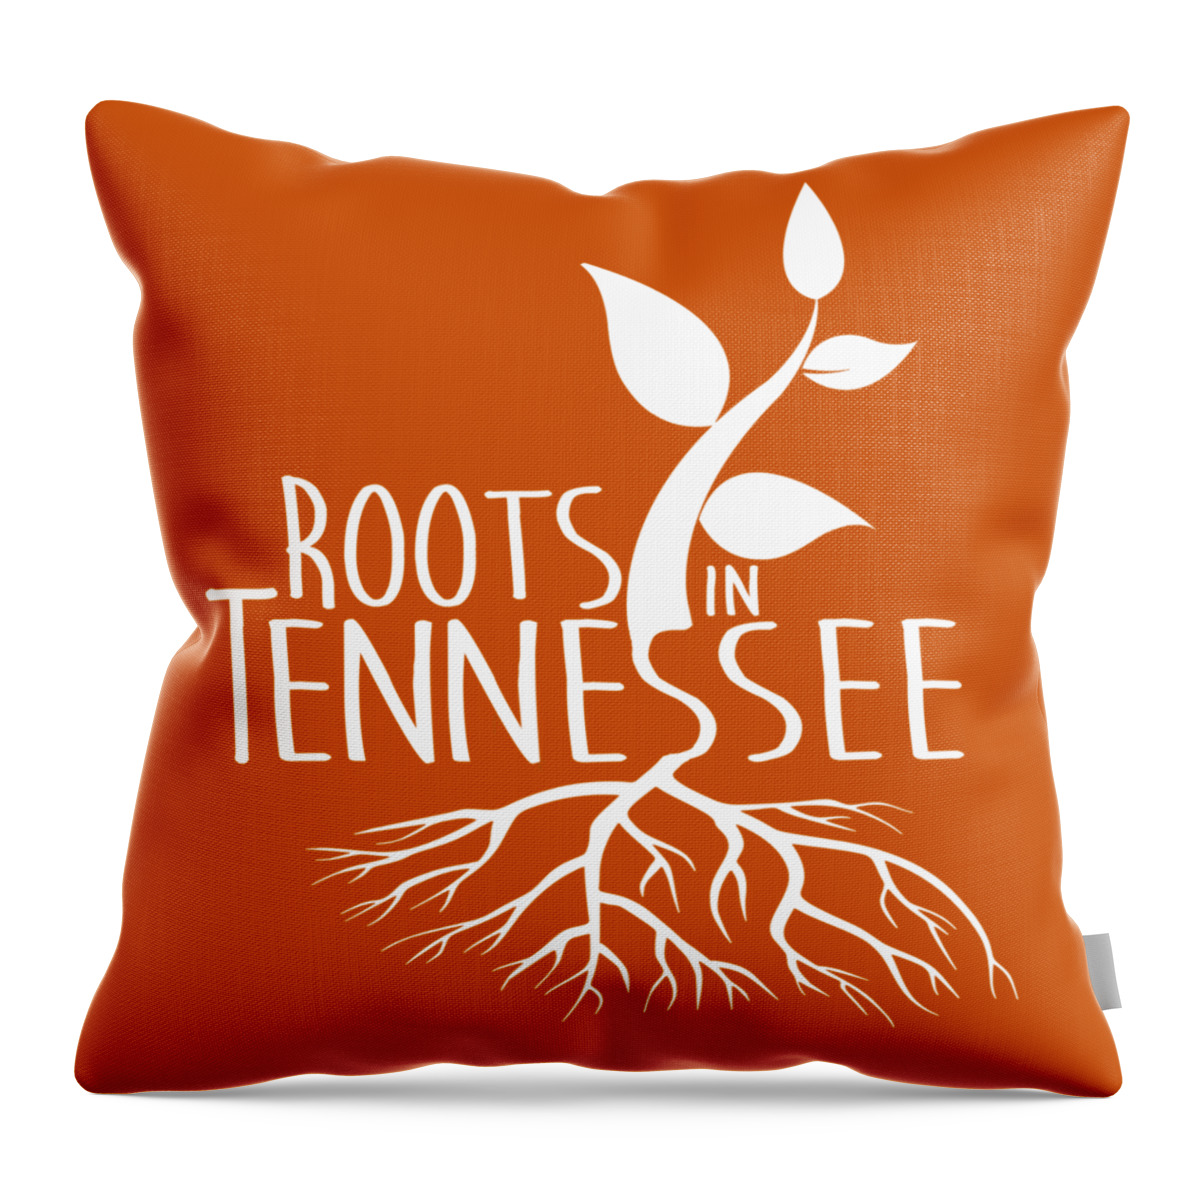 Roots In Tennessee Throw Pillow featuring the digital art Roots in Tennessee Seedlin by Heather Applegate